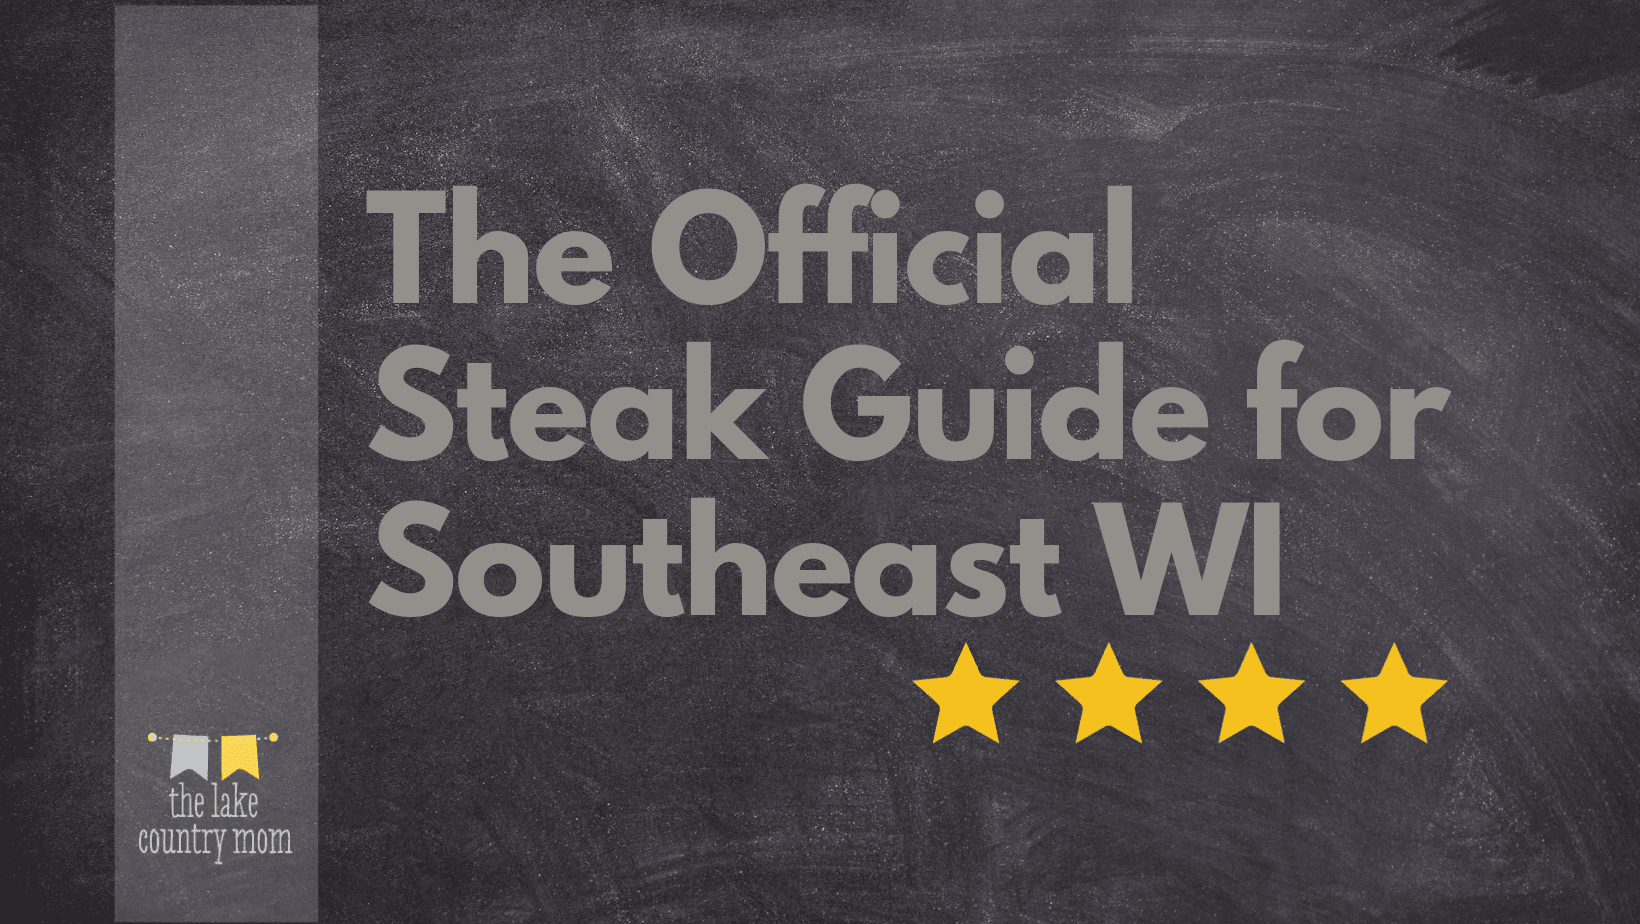 The Official Steak Guide for Southeast WI